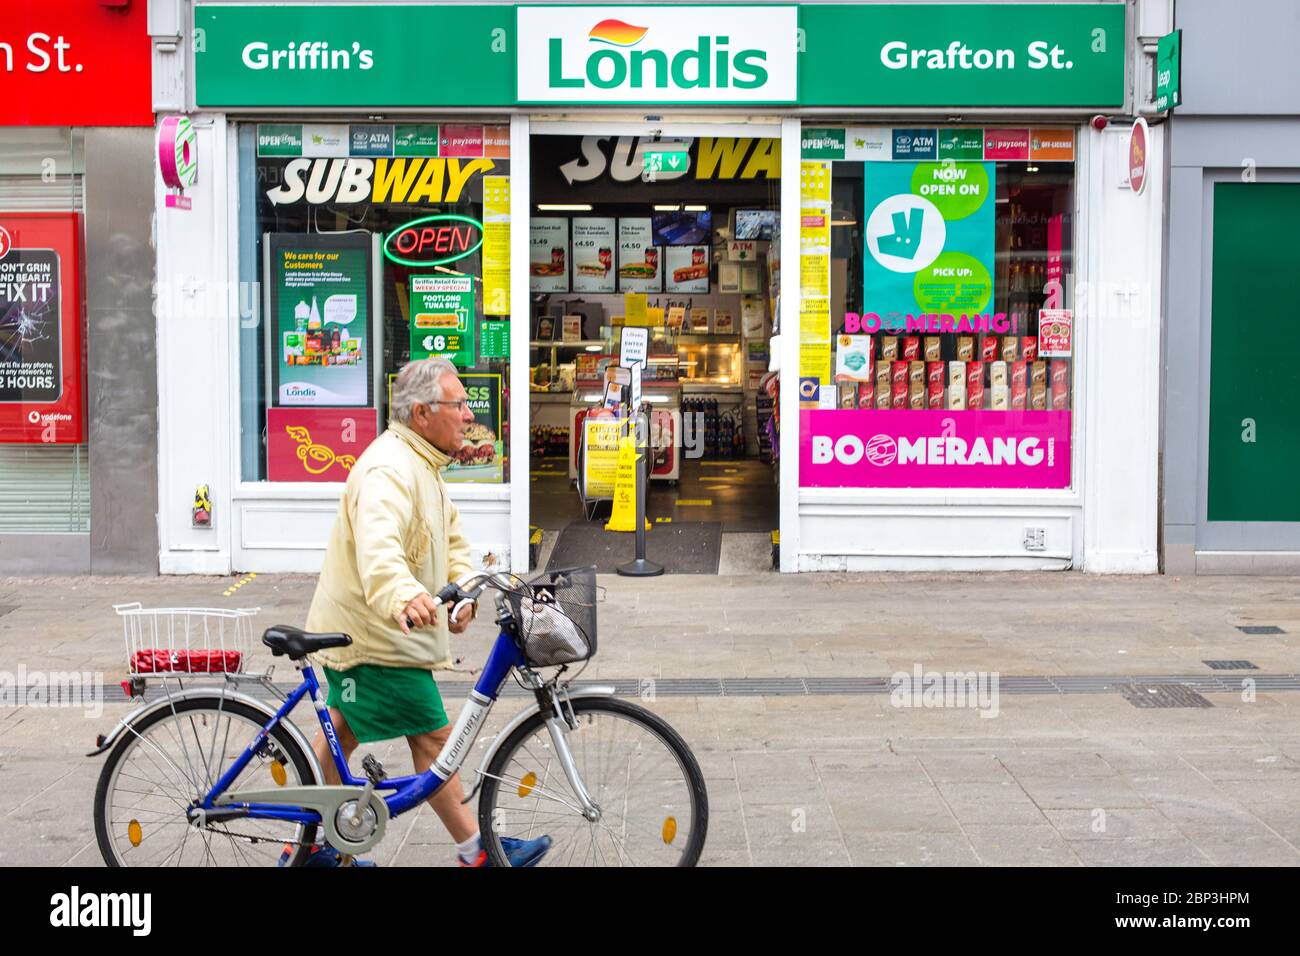 Londis store on Grafton Street following government advice on hygiene measures. Reduced footfall in Dublin City Centre due to Covid-19 pandemic . Stock Photo